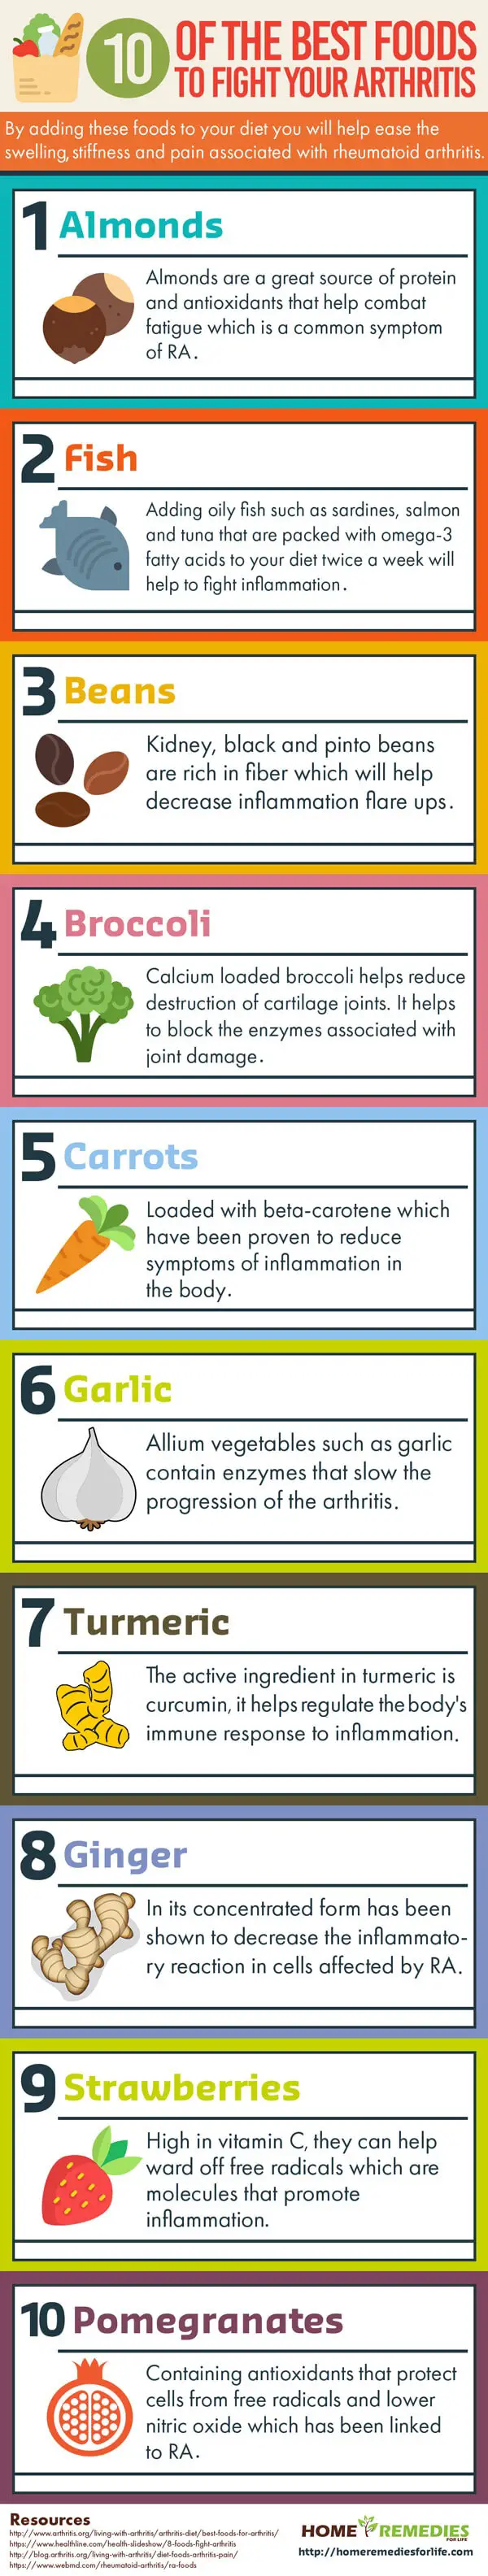 10 of the best foods too fight your arthritis